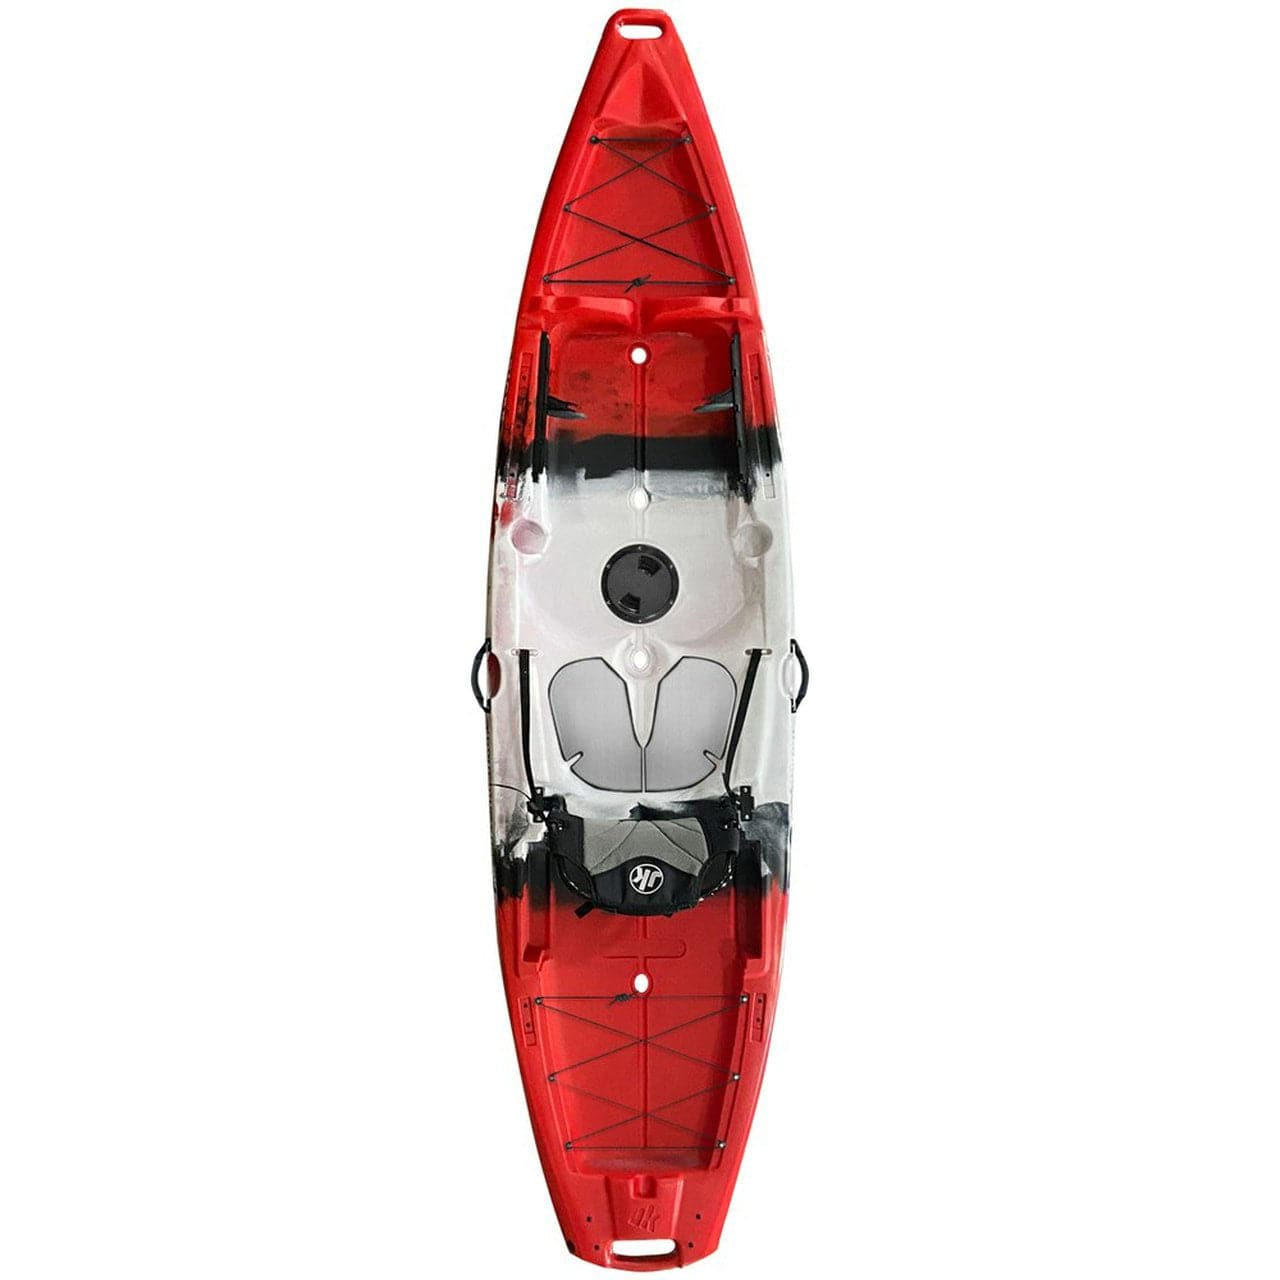 Featuring the Staxx fishing kayak, sit-on-top rec / touring kayak manufactured by Jackson Kayak shown here from a third angle.